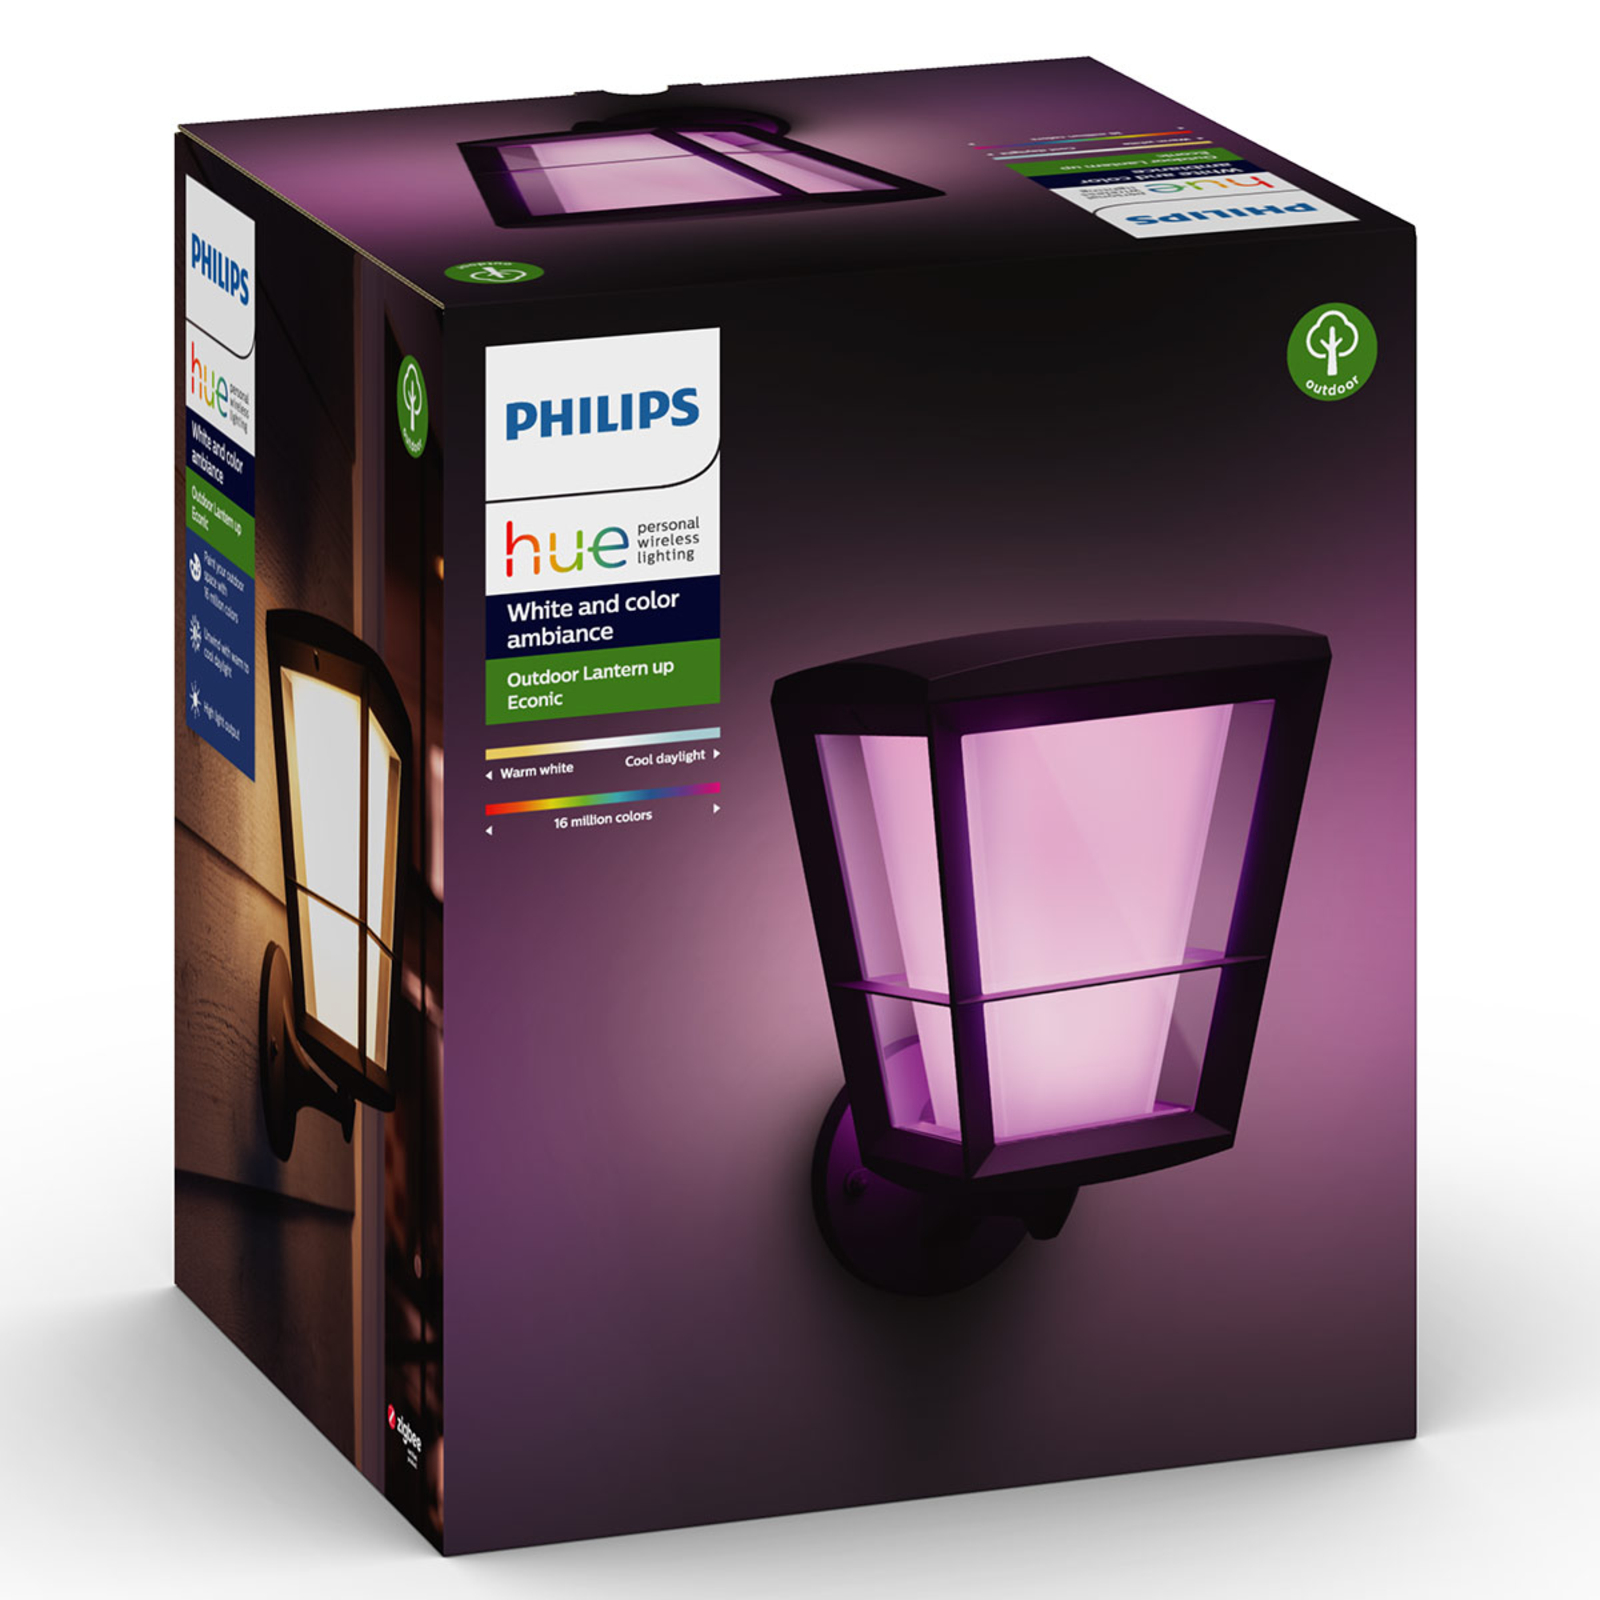 Philips Hue White+Color Econic vägglampa, ovan